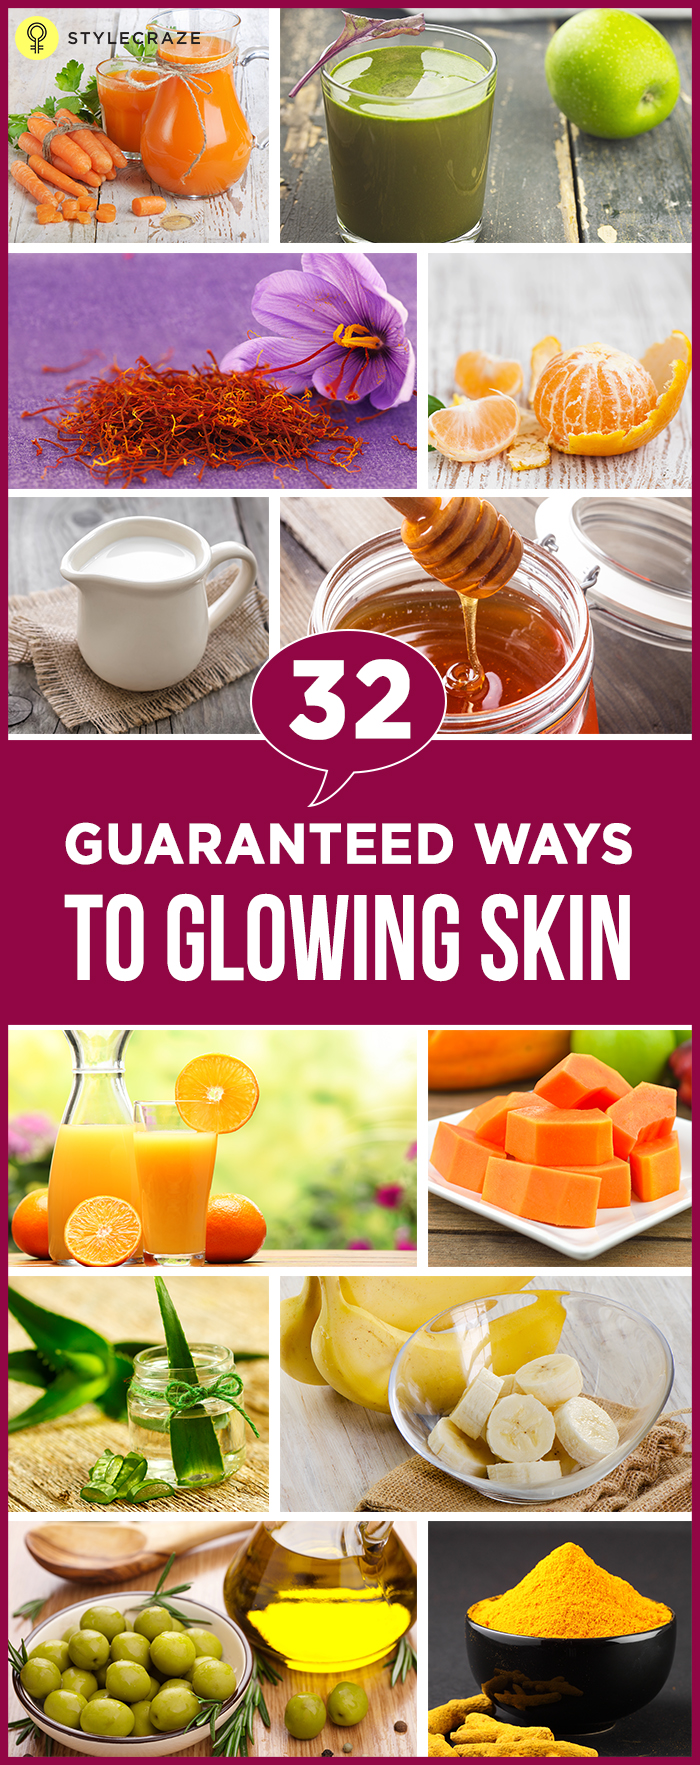 20 Effective Home Remedies For Glowing Skin That Really Work